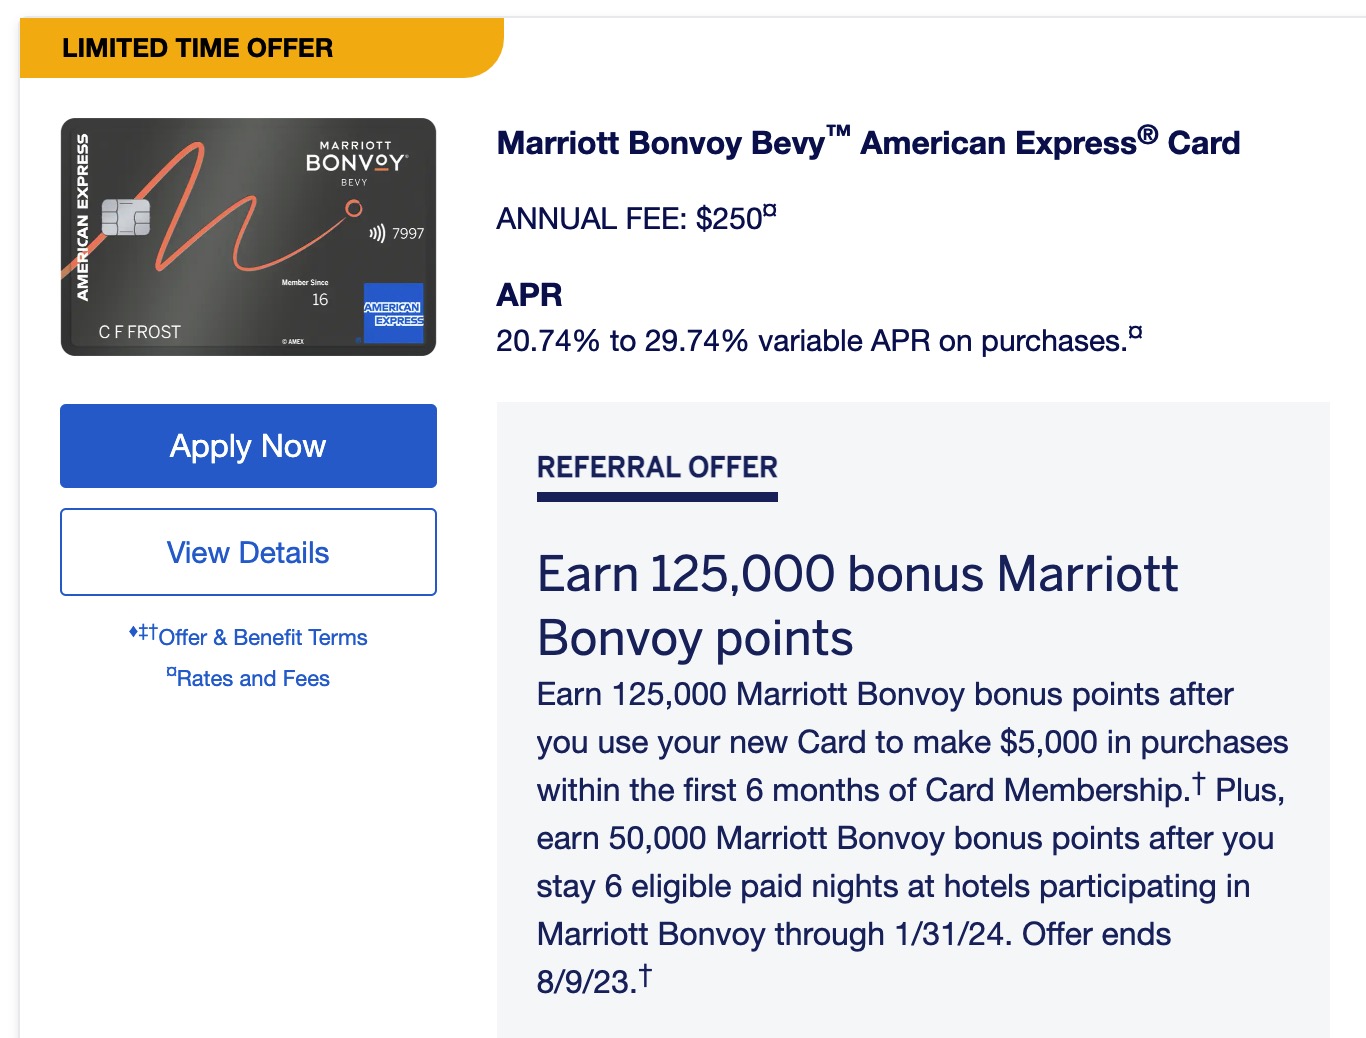 The Current Best US Credit Card, Bank referral offers and more